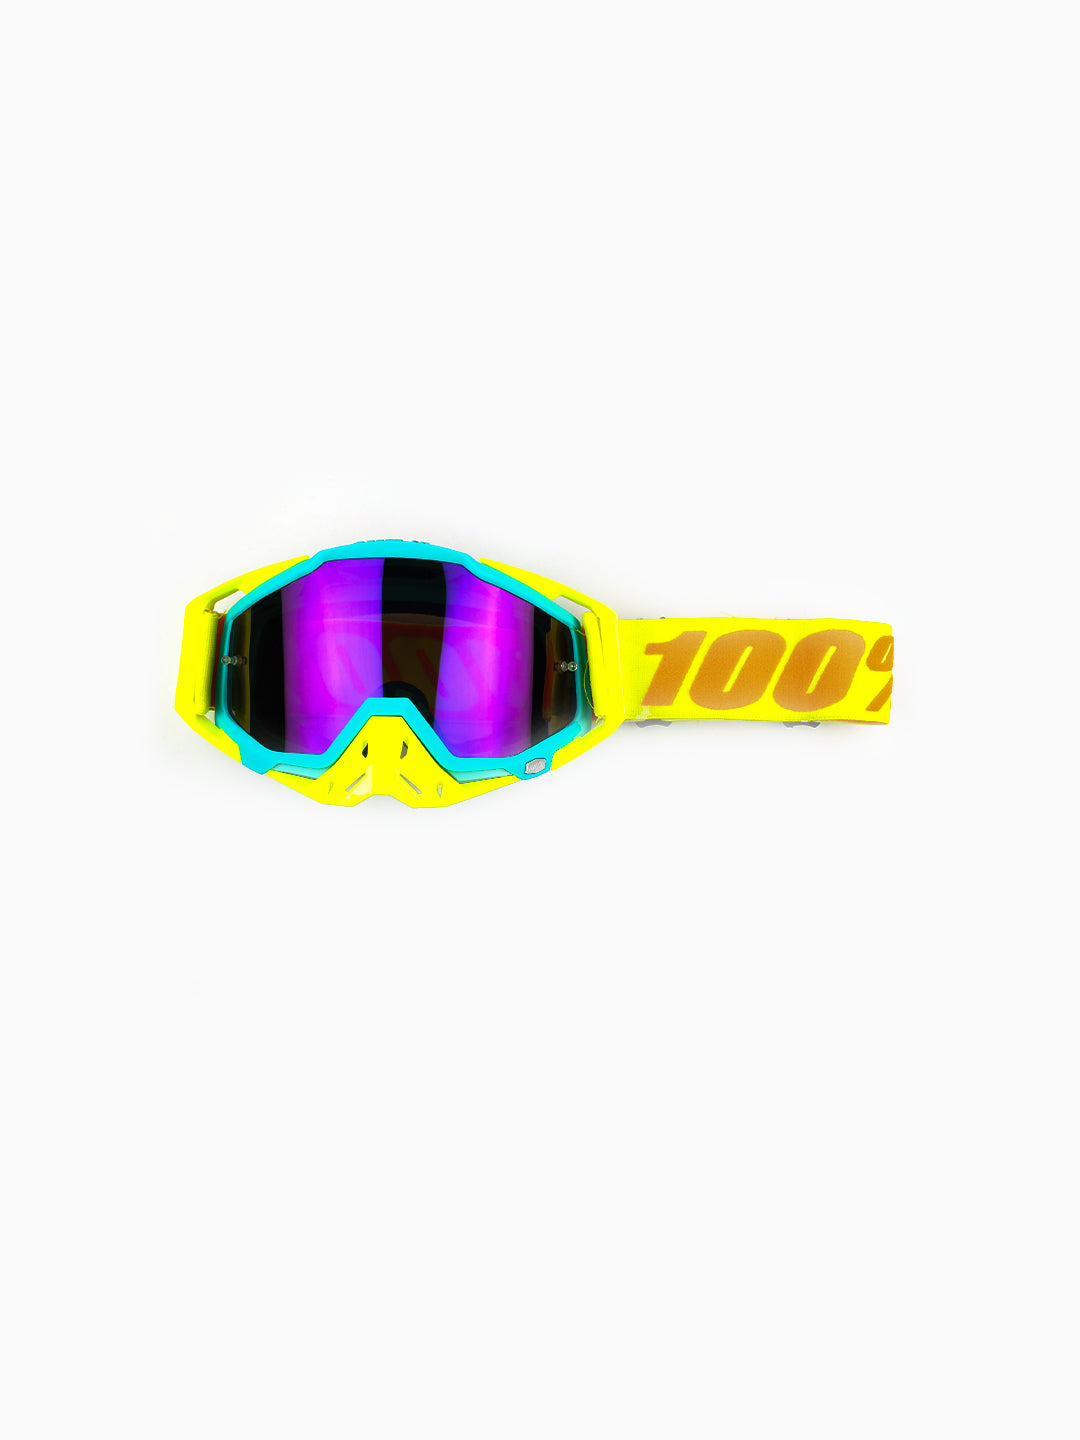 100% Goggles Yellow Green Blue Tint